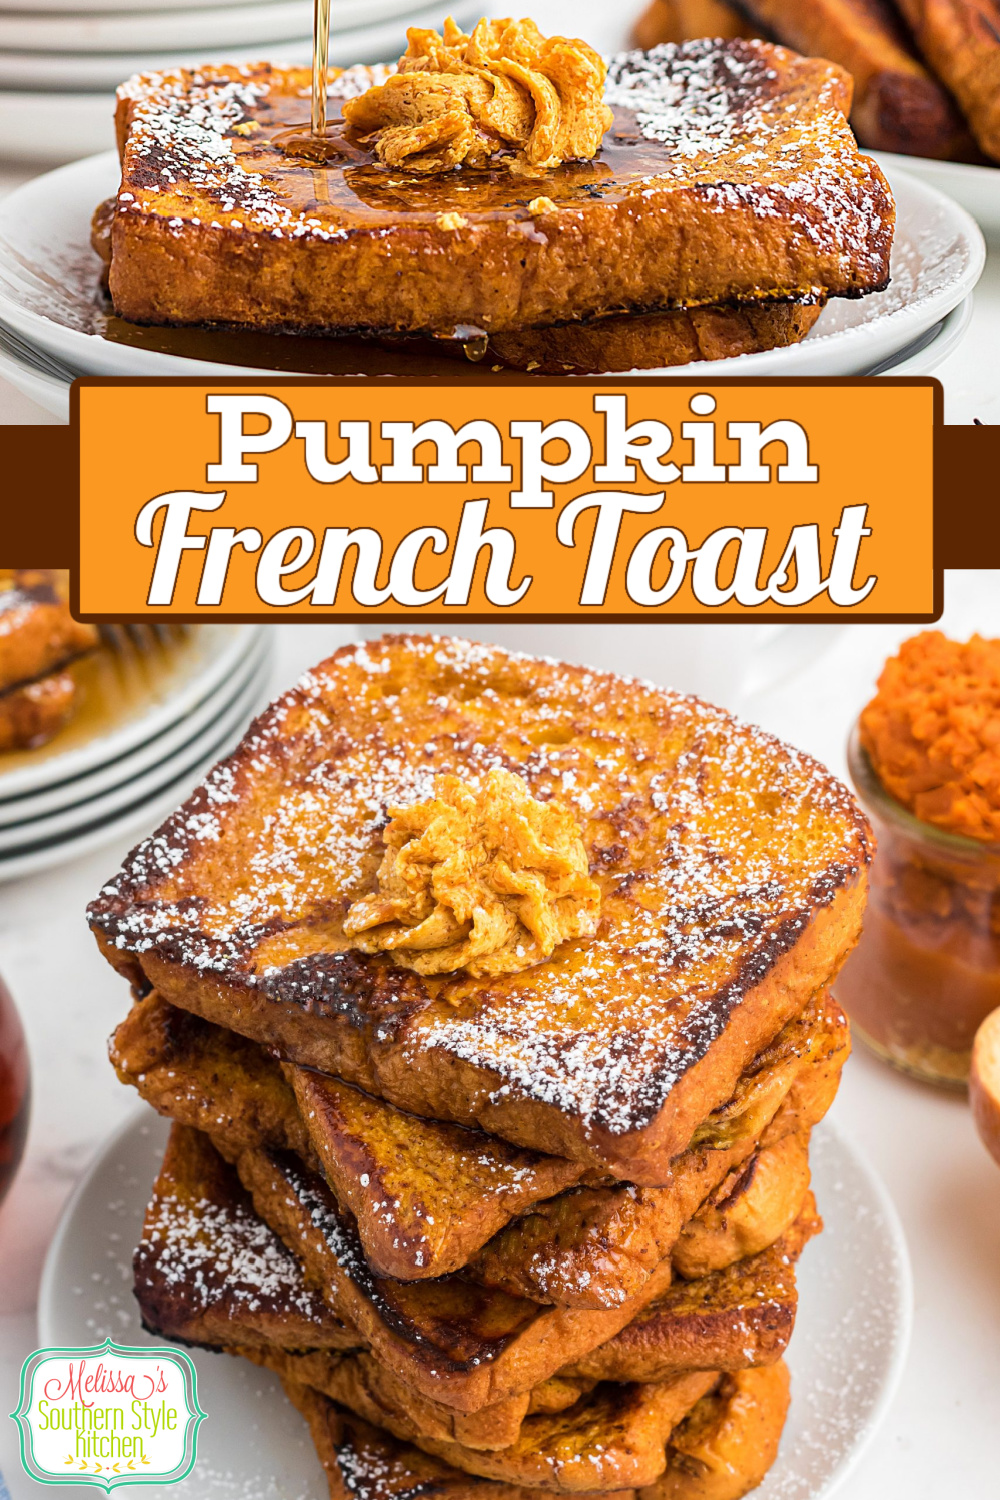 Fall flavors really shine in this recipe for cinnamon spice infused Pumpkin French Toast with Maple Pumpkin Butter #pumpkinrecipes #pumpkinfrenchtoast #frenchtoastrecipes #frenchtoast #maplebutterrecipes #pumpkinbutterrecipe via @melissasssk